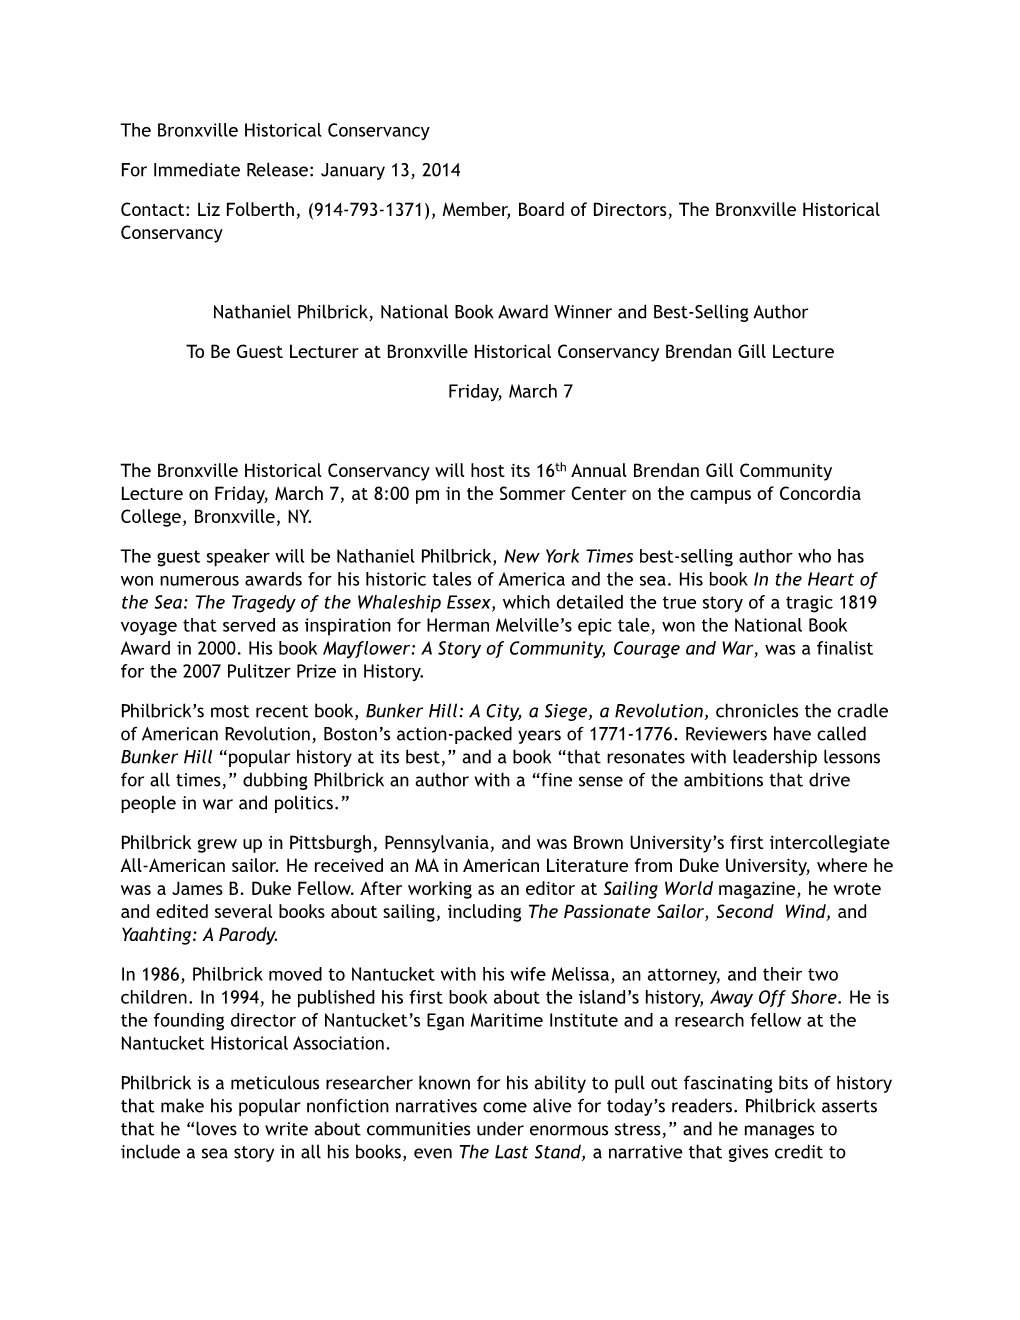 Nat Philbrick Press Release 1.Pages